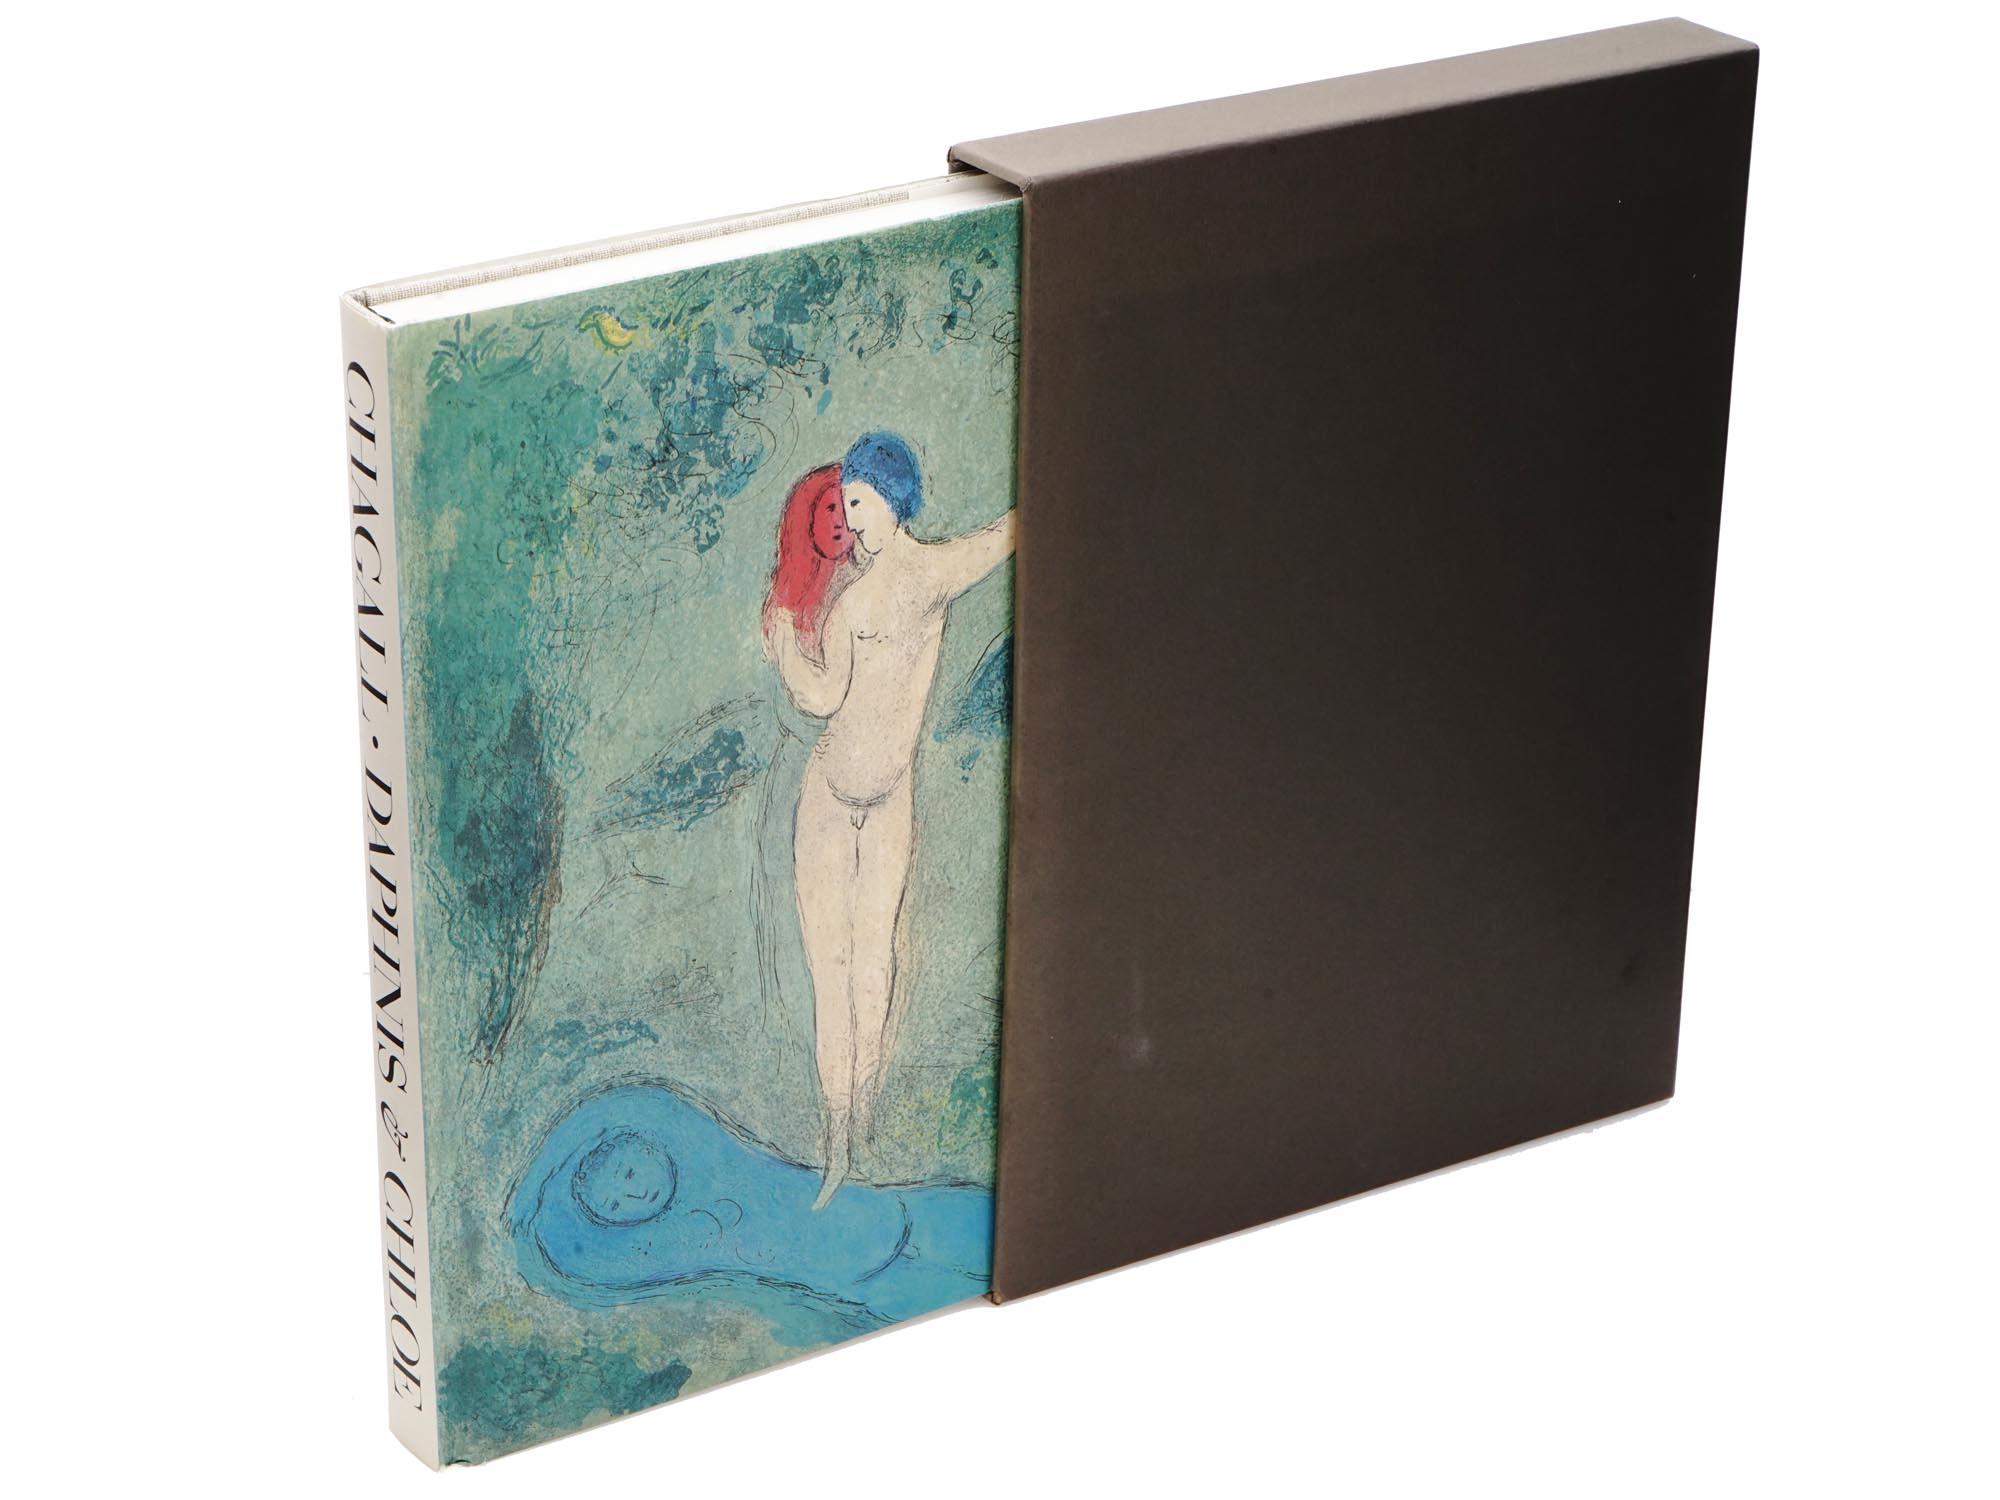 DAPHNIS AND CHLOE BOOK ILLUSTRATED BY MARC CHAGALL PIC-0